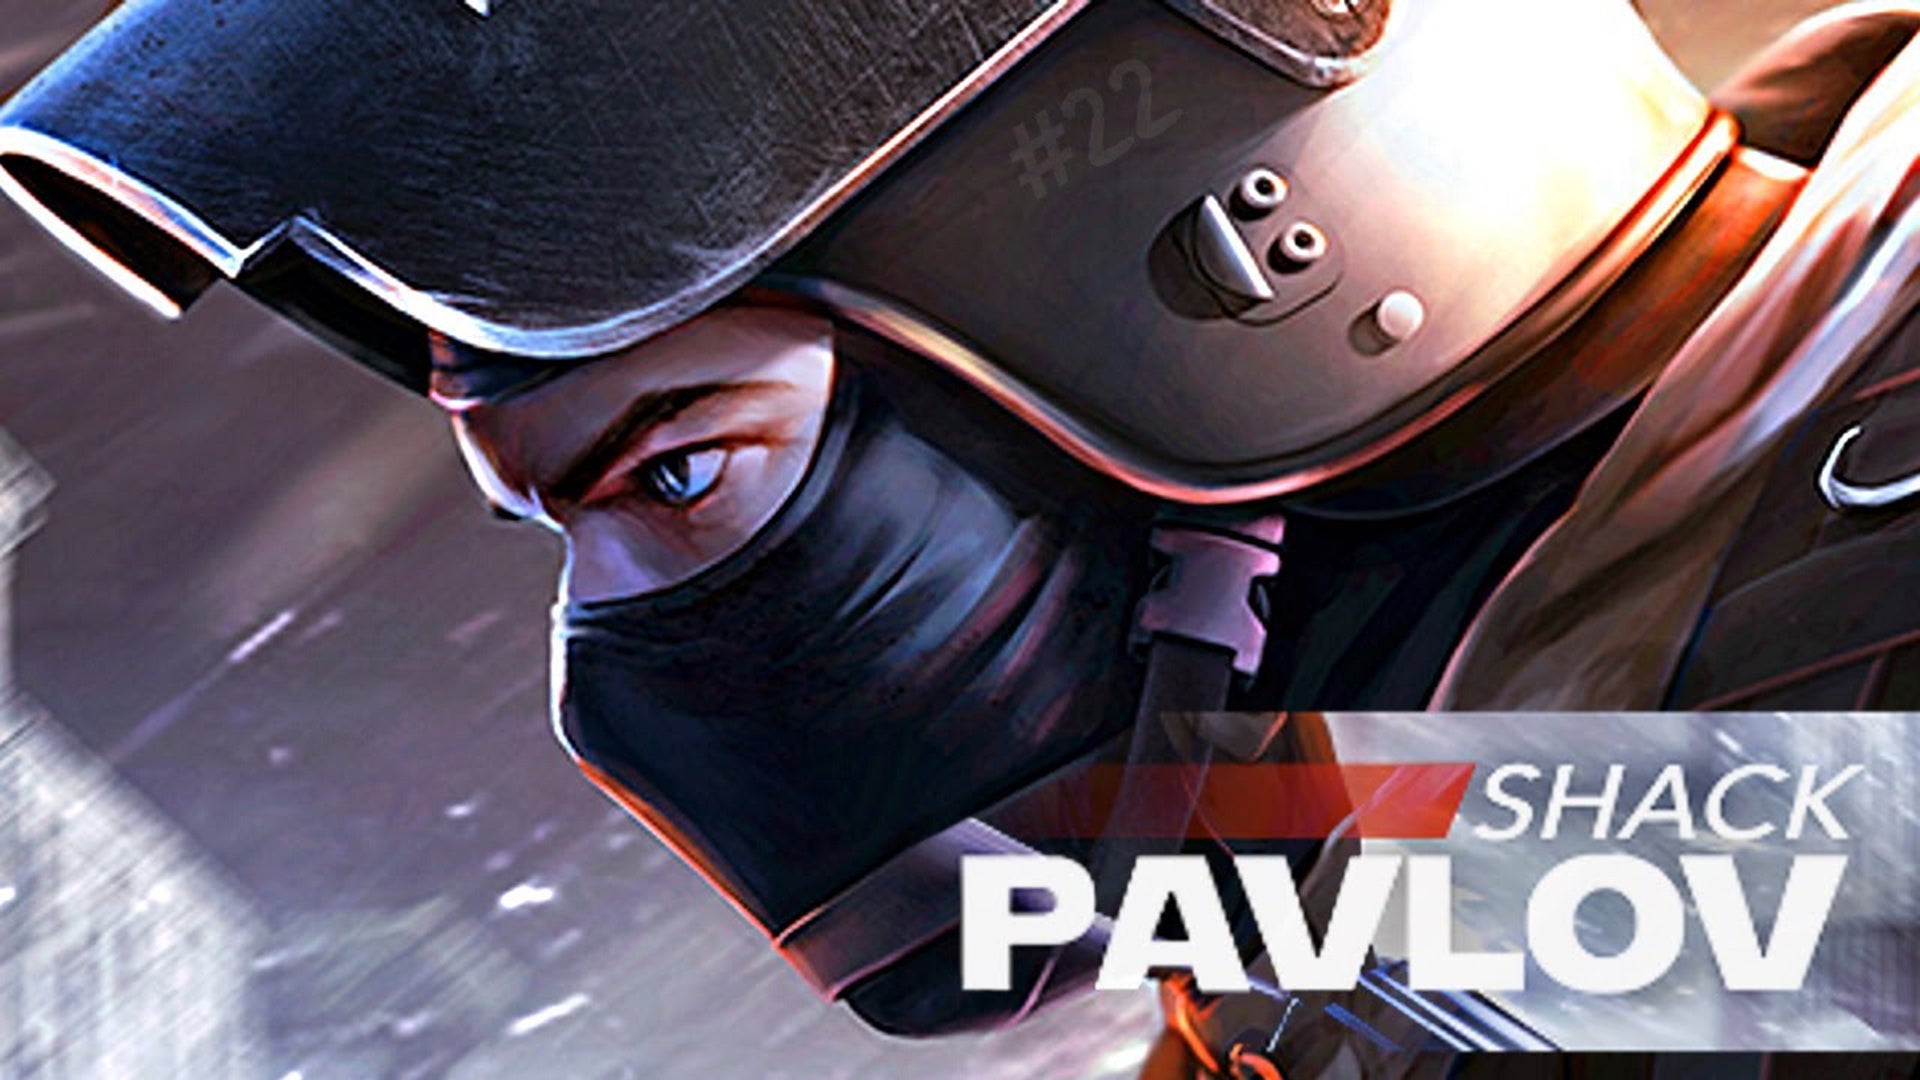 Image for Pavlov Shack is PSVR2's first game, will be cross-play with Oculus Quest